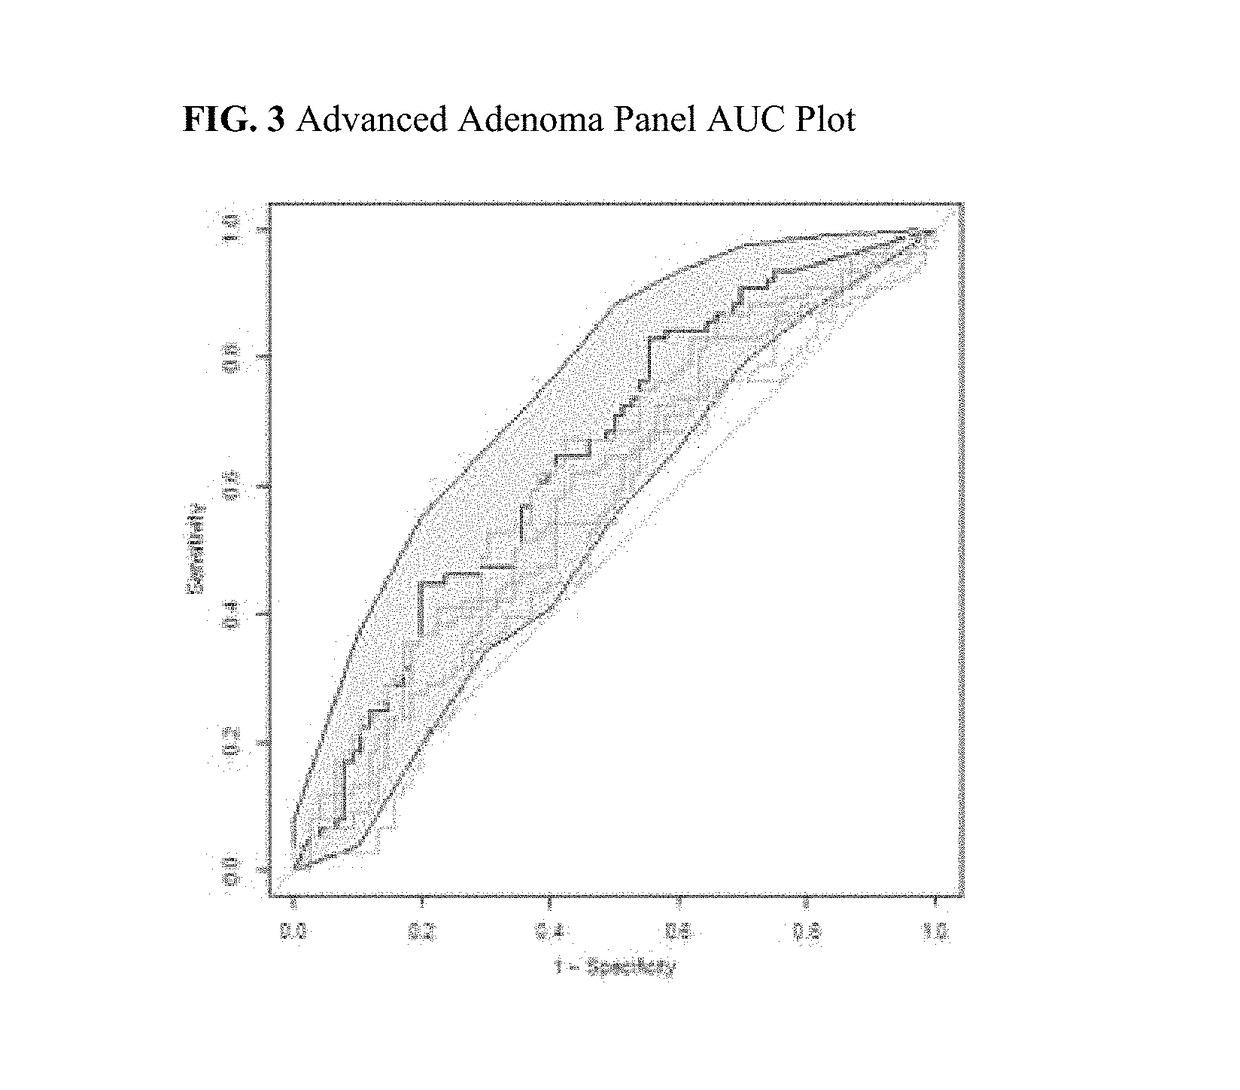 Protein biomarker panels for detecting colorectal cancer and advanced adenoma